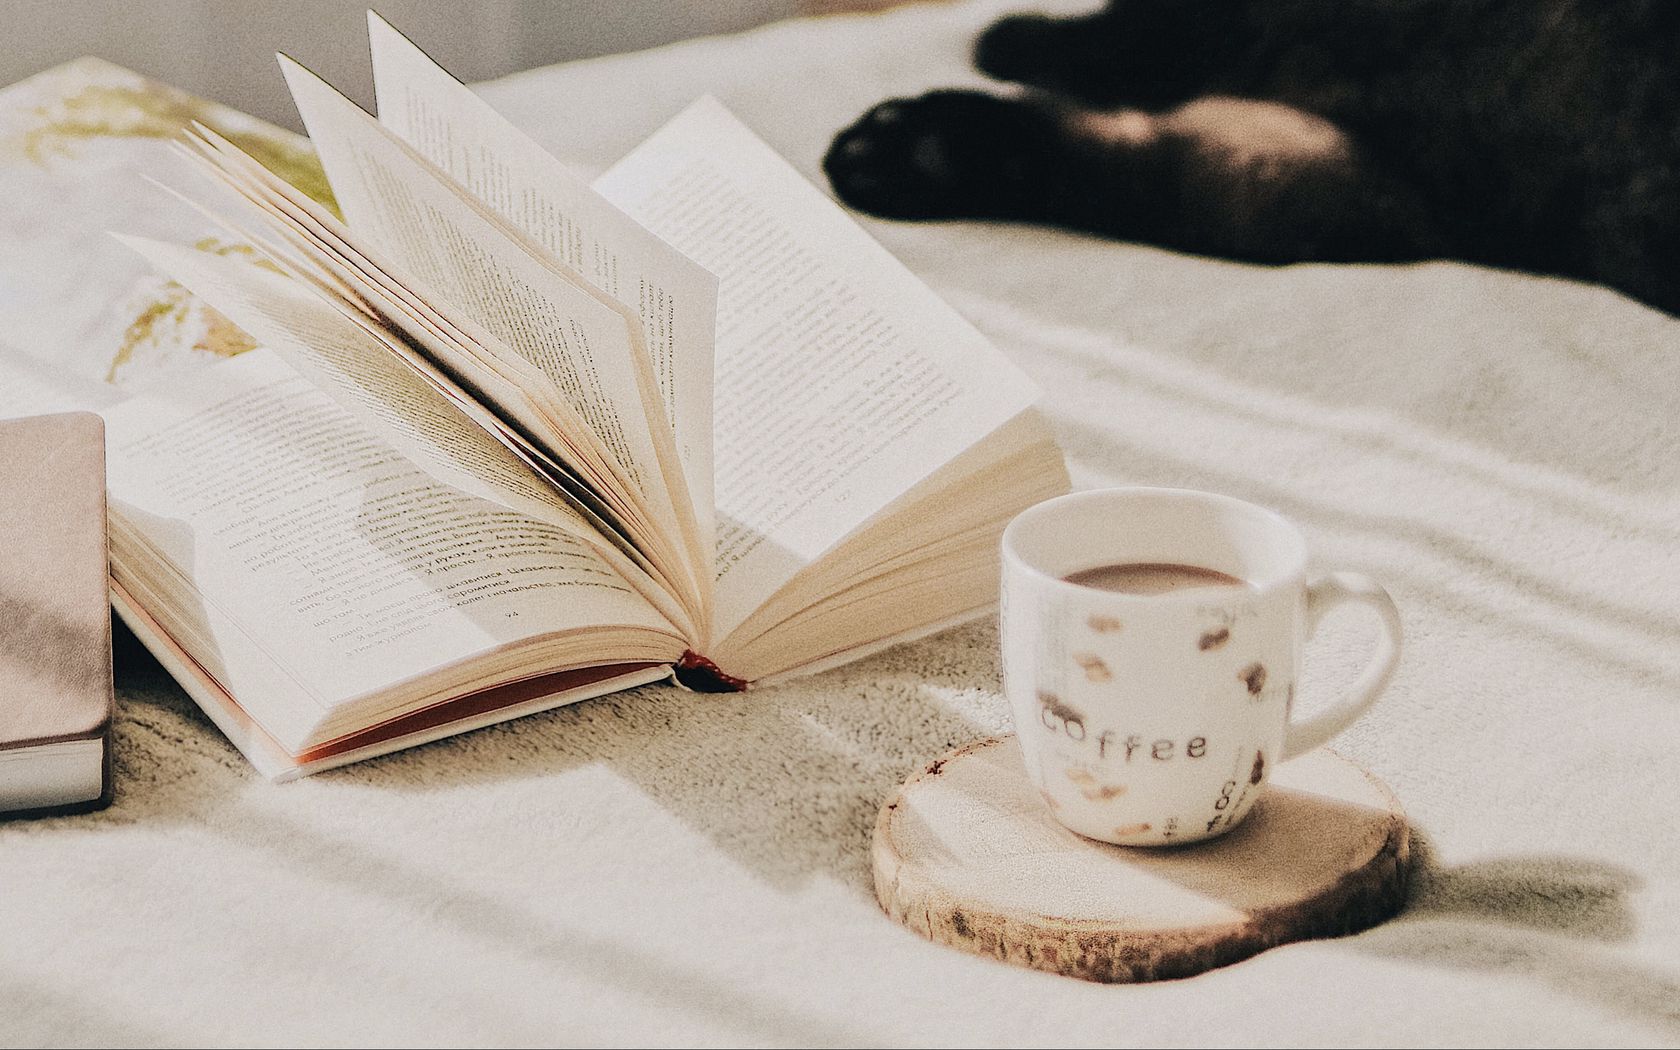 Download wallpaper 1680x1050 cup, coffee, book, pages, cat widescreen 16:10  hd background